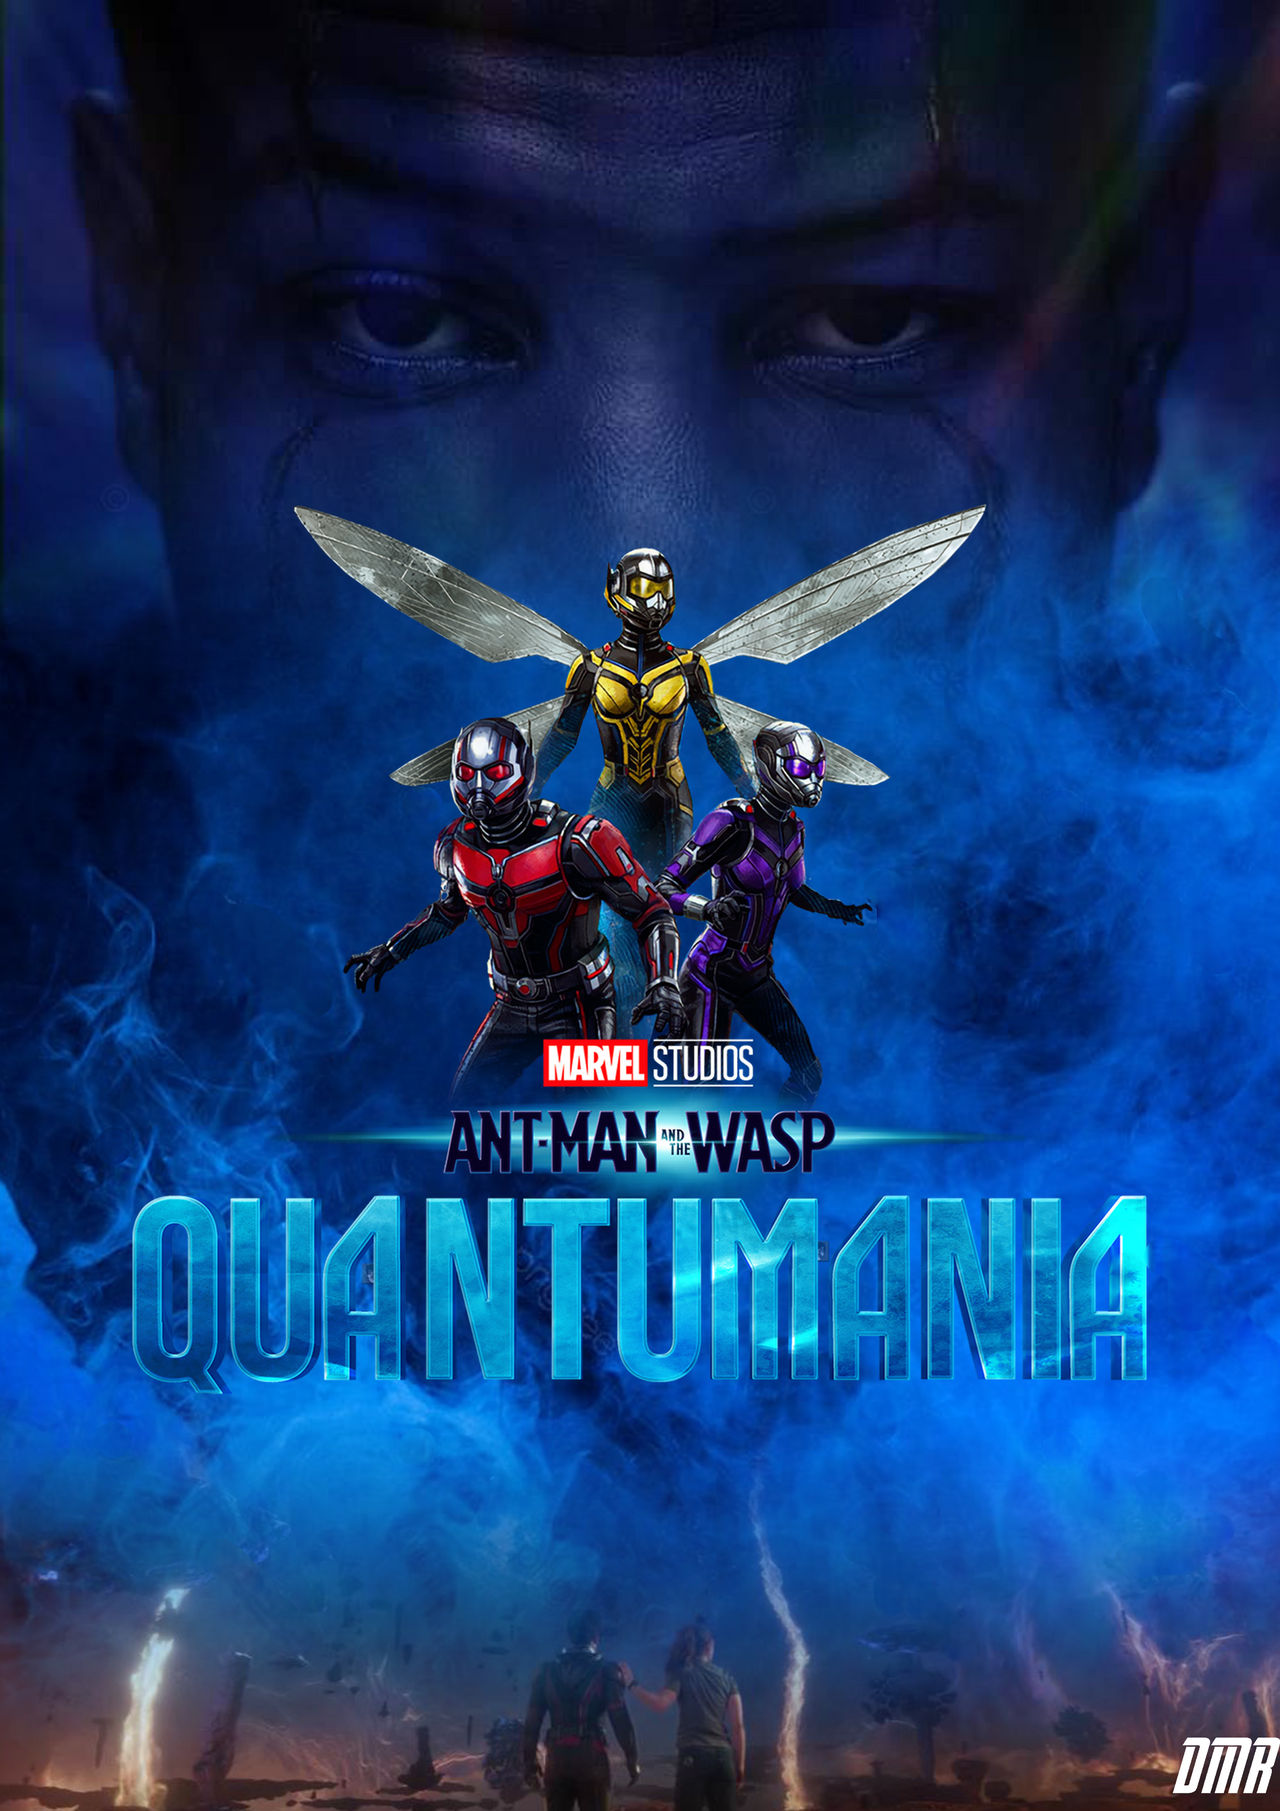 Ant-Man and the Wasp Quantumania (2023)09 by DrDarkDoom on DeviantArt